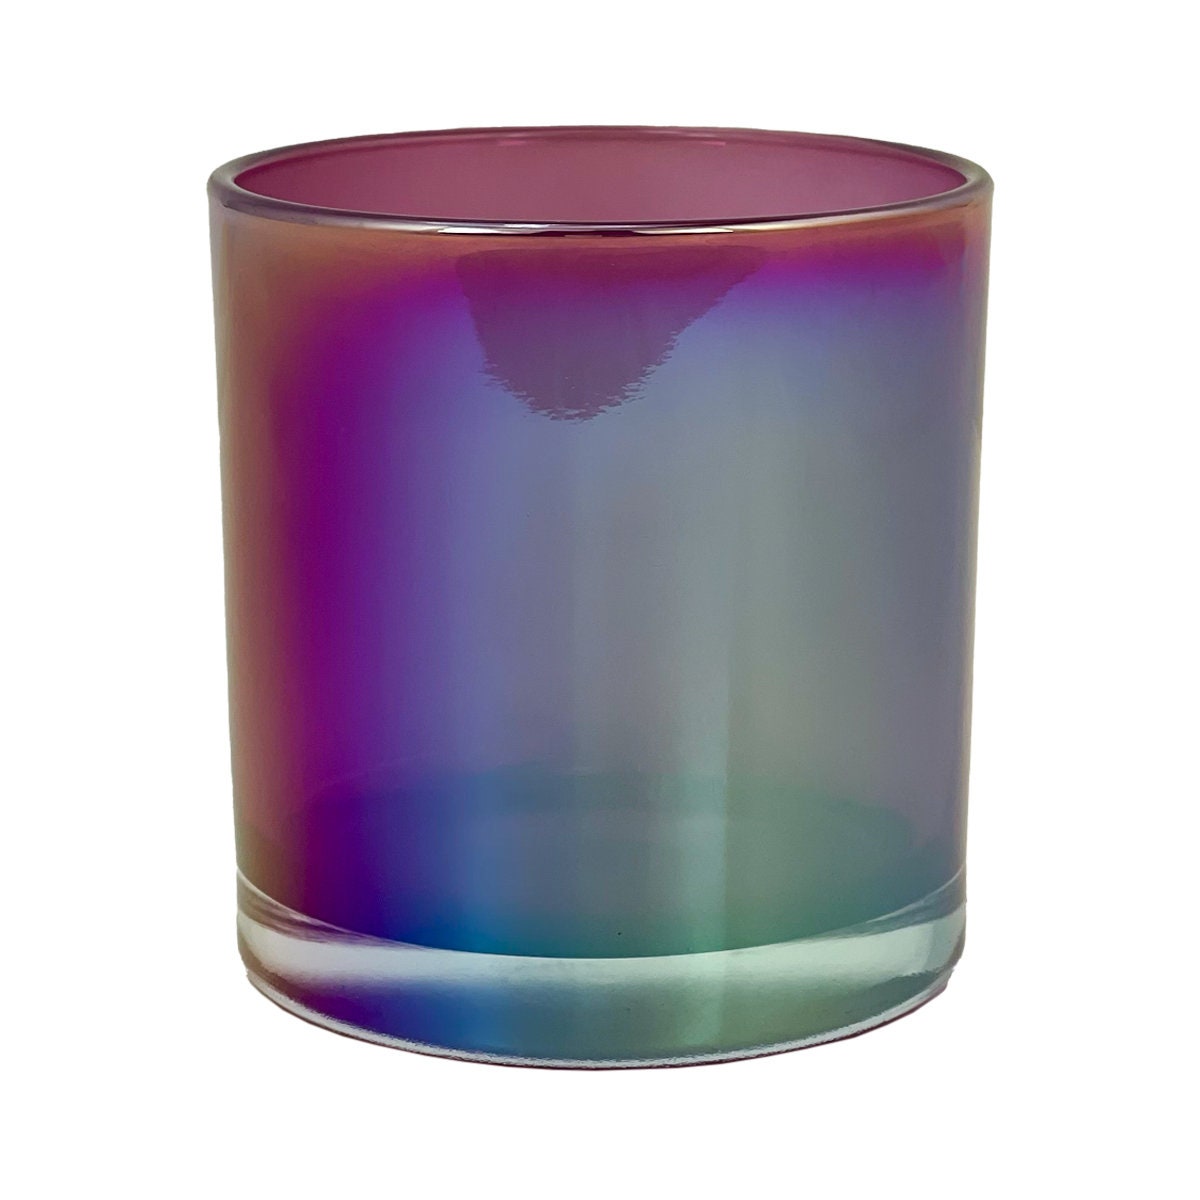 Iridescent Votive Candle Holders Supplier China, Iridescent Votive Candle  Holders manufacturer China, Iridescent Votive Candle Holders factory china